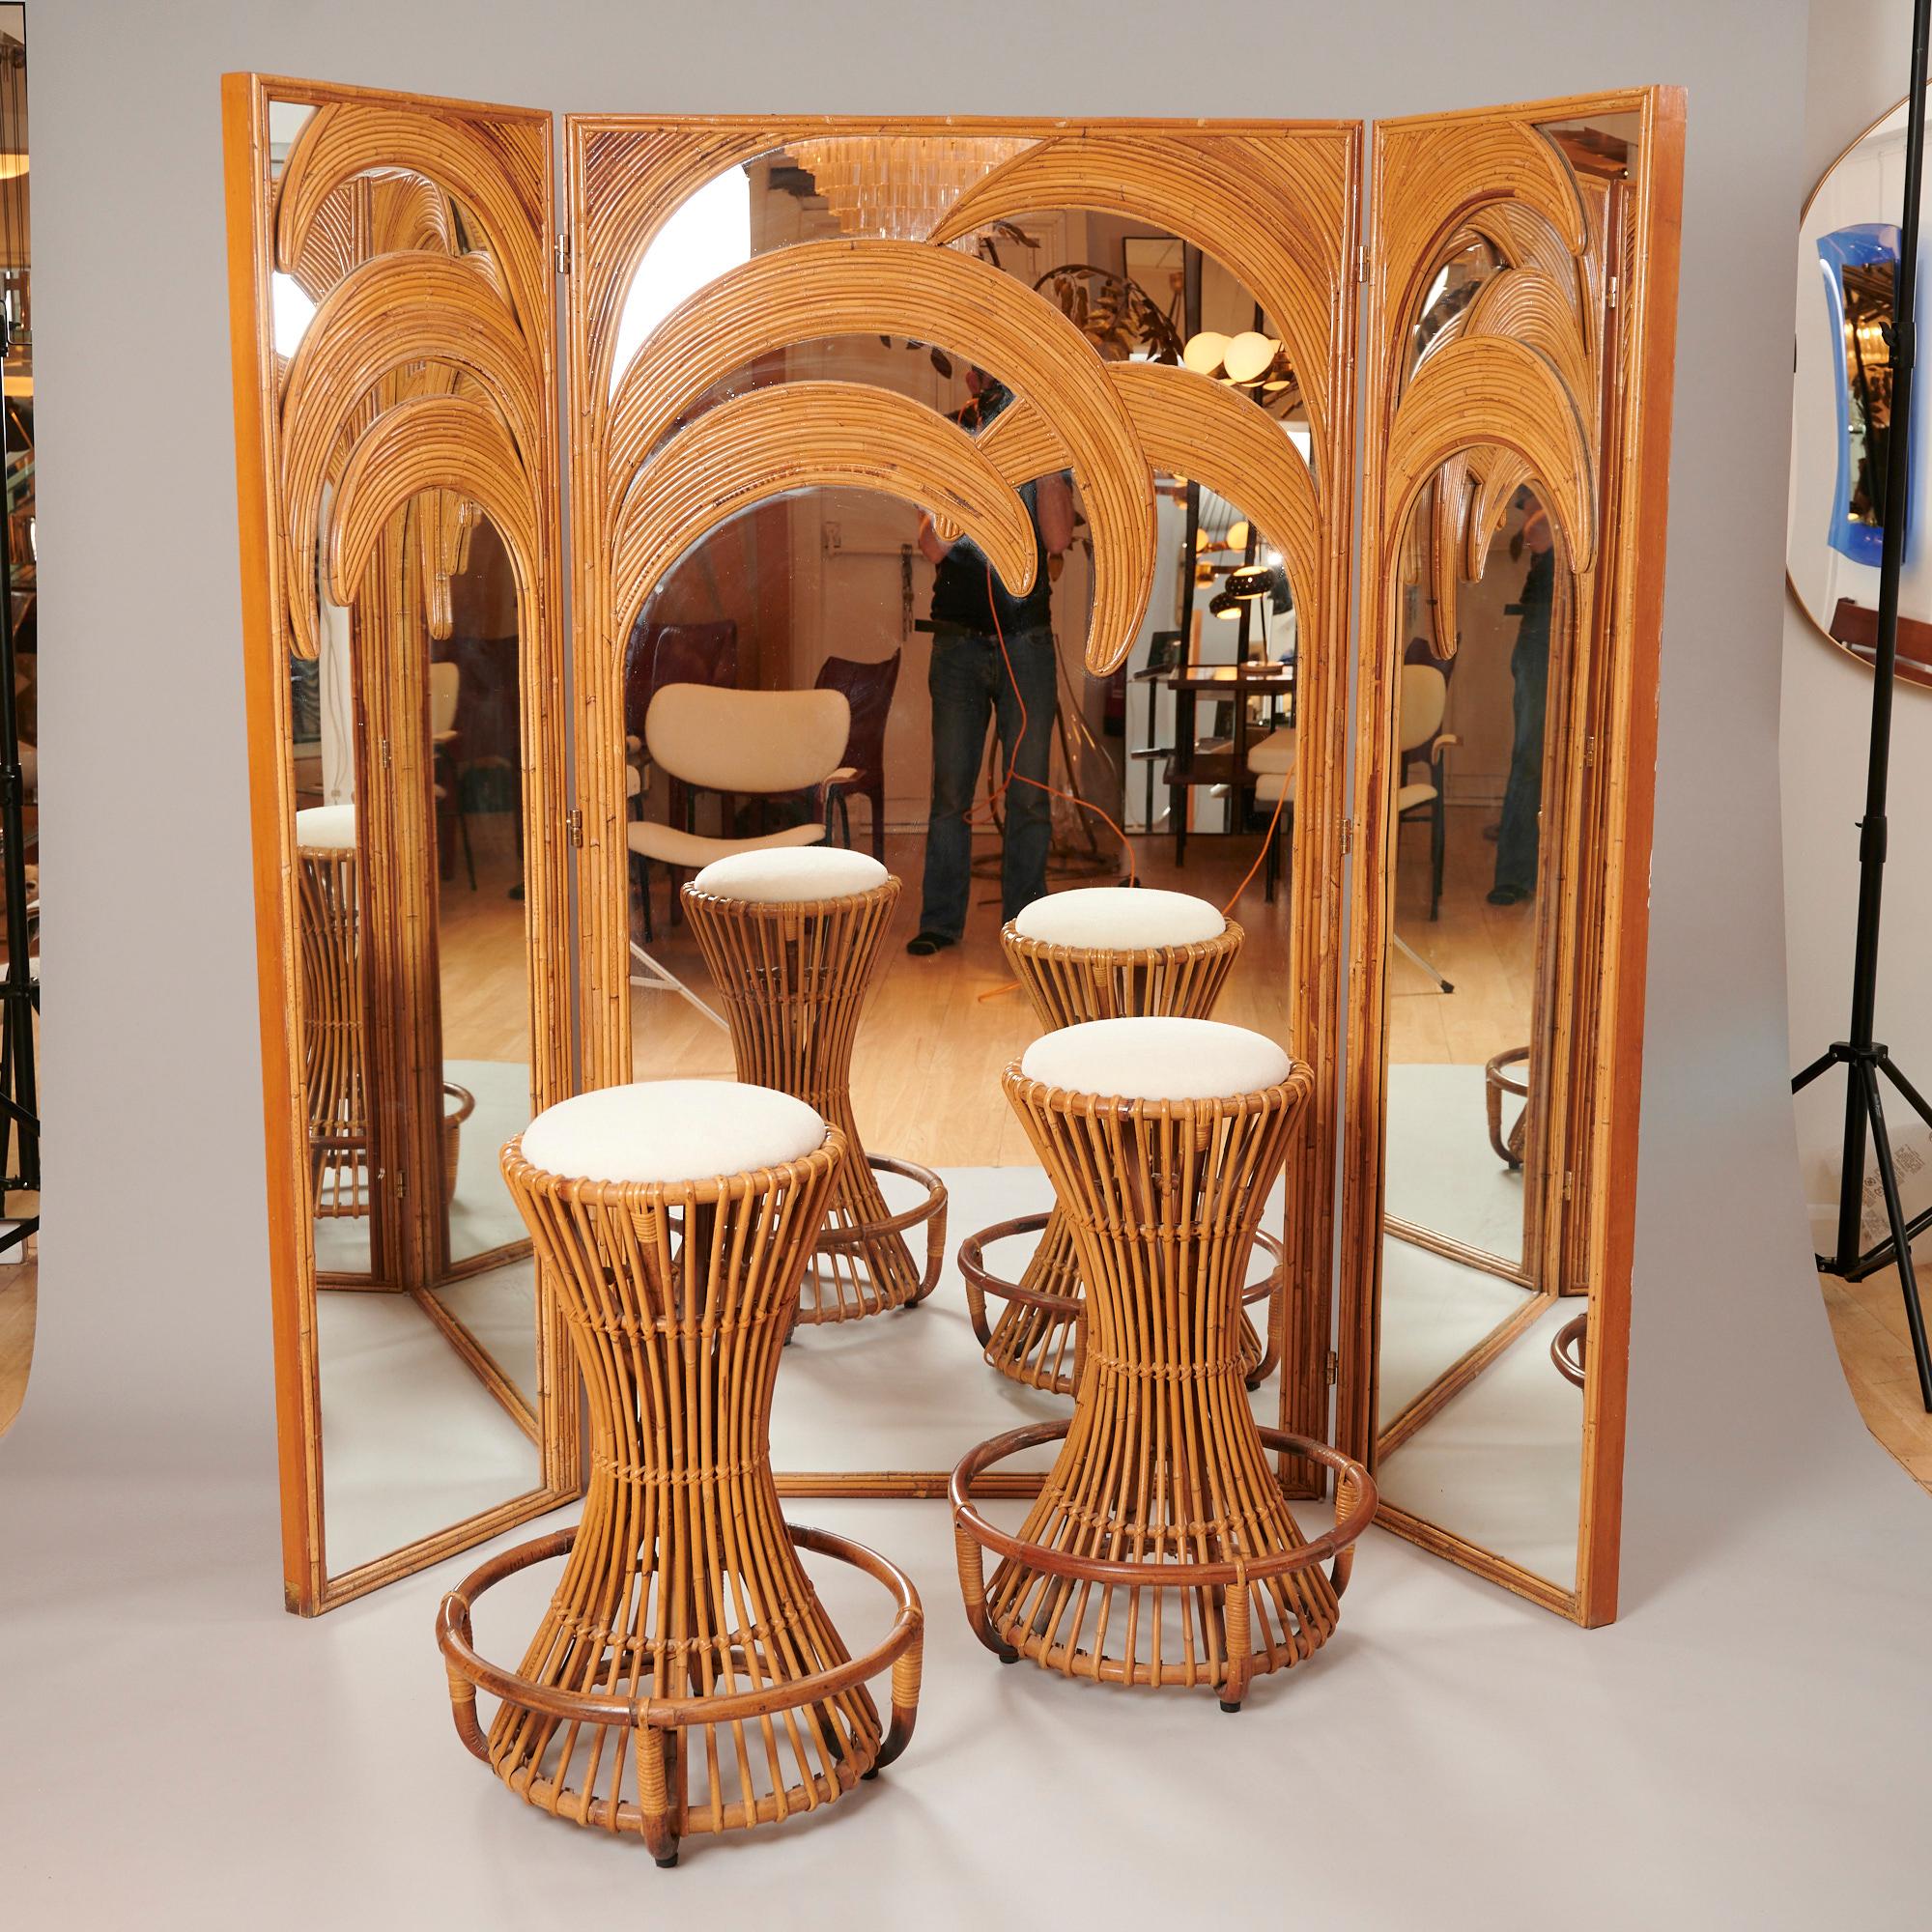 Italian Vivai del Sud Mirrored Screen with Bamboo Palm Trees, C1970 For Sale